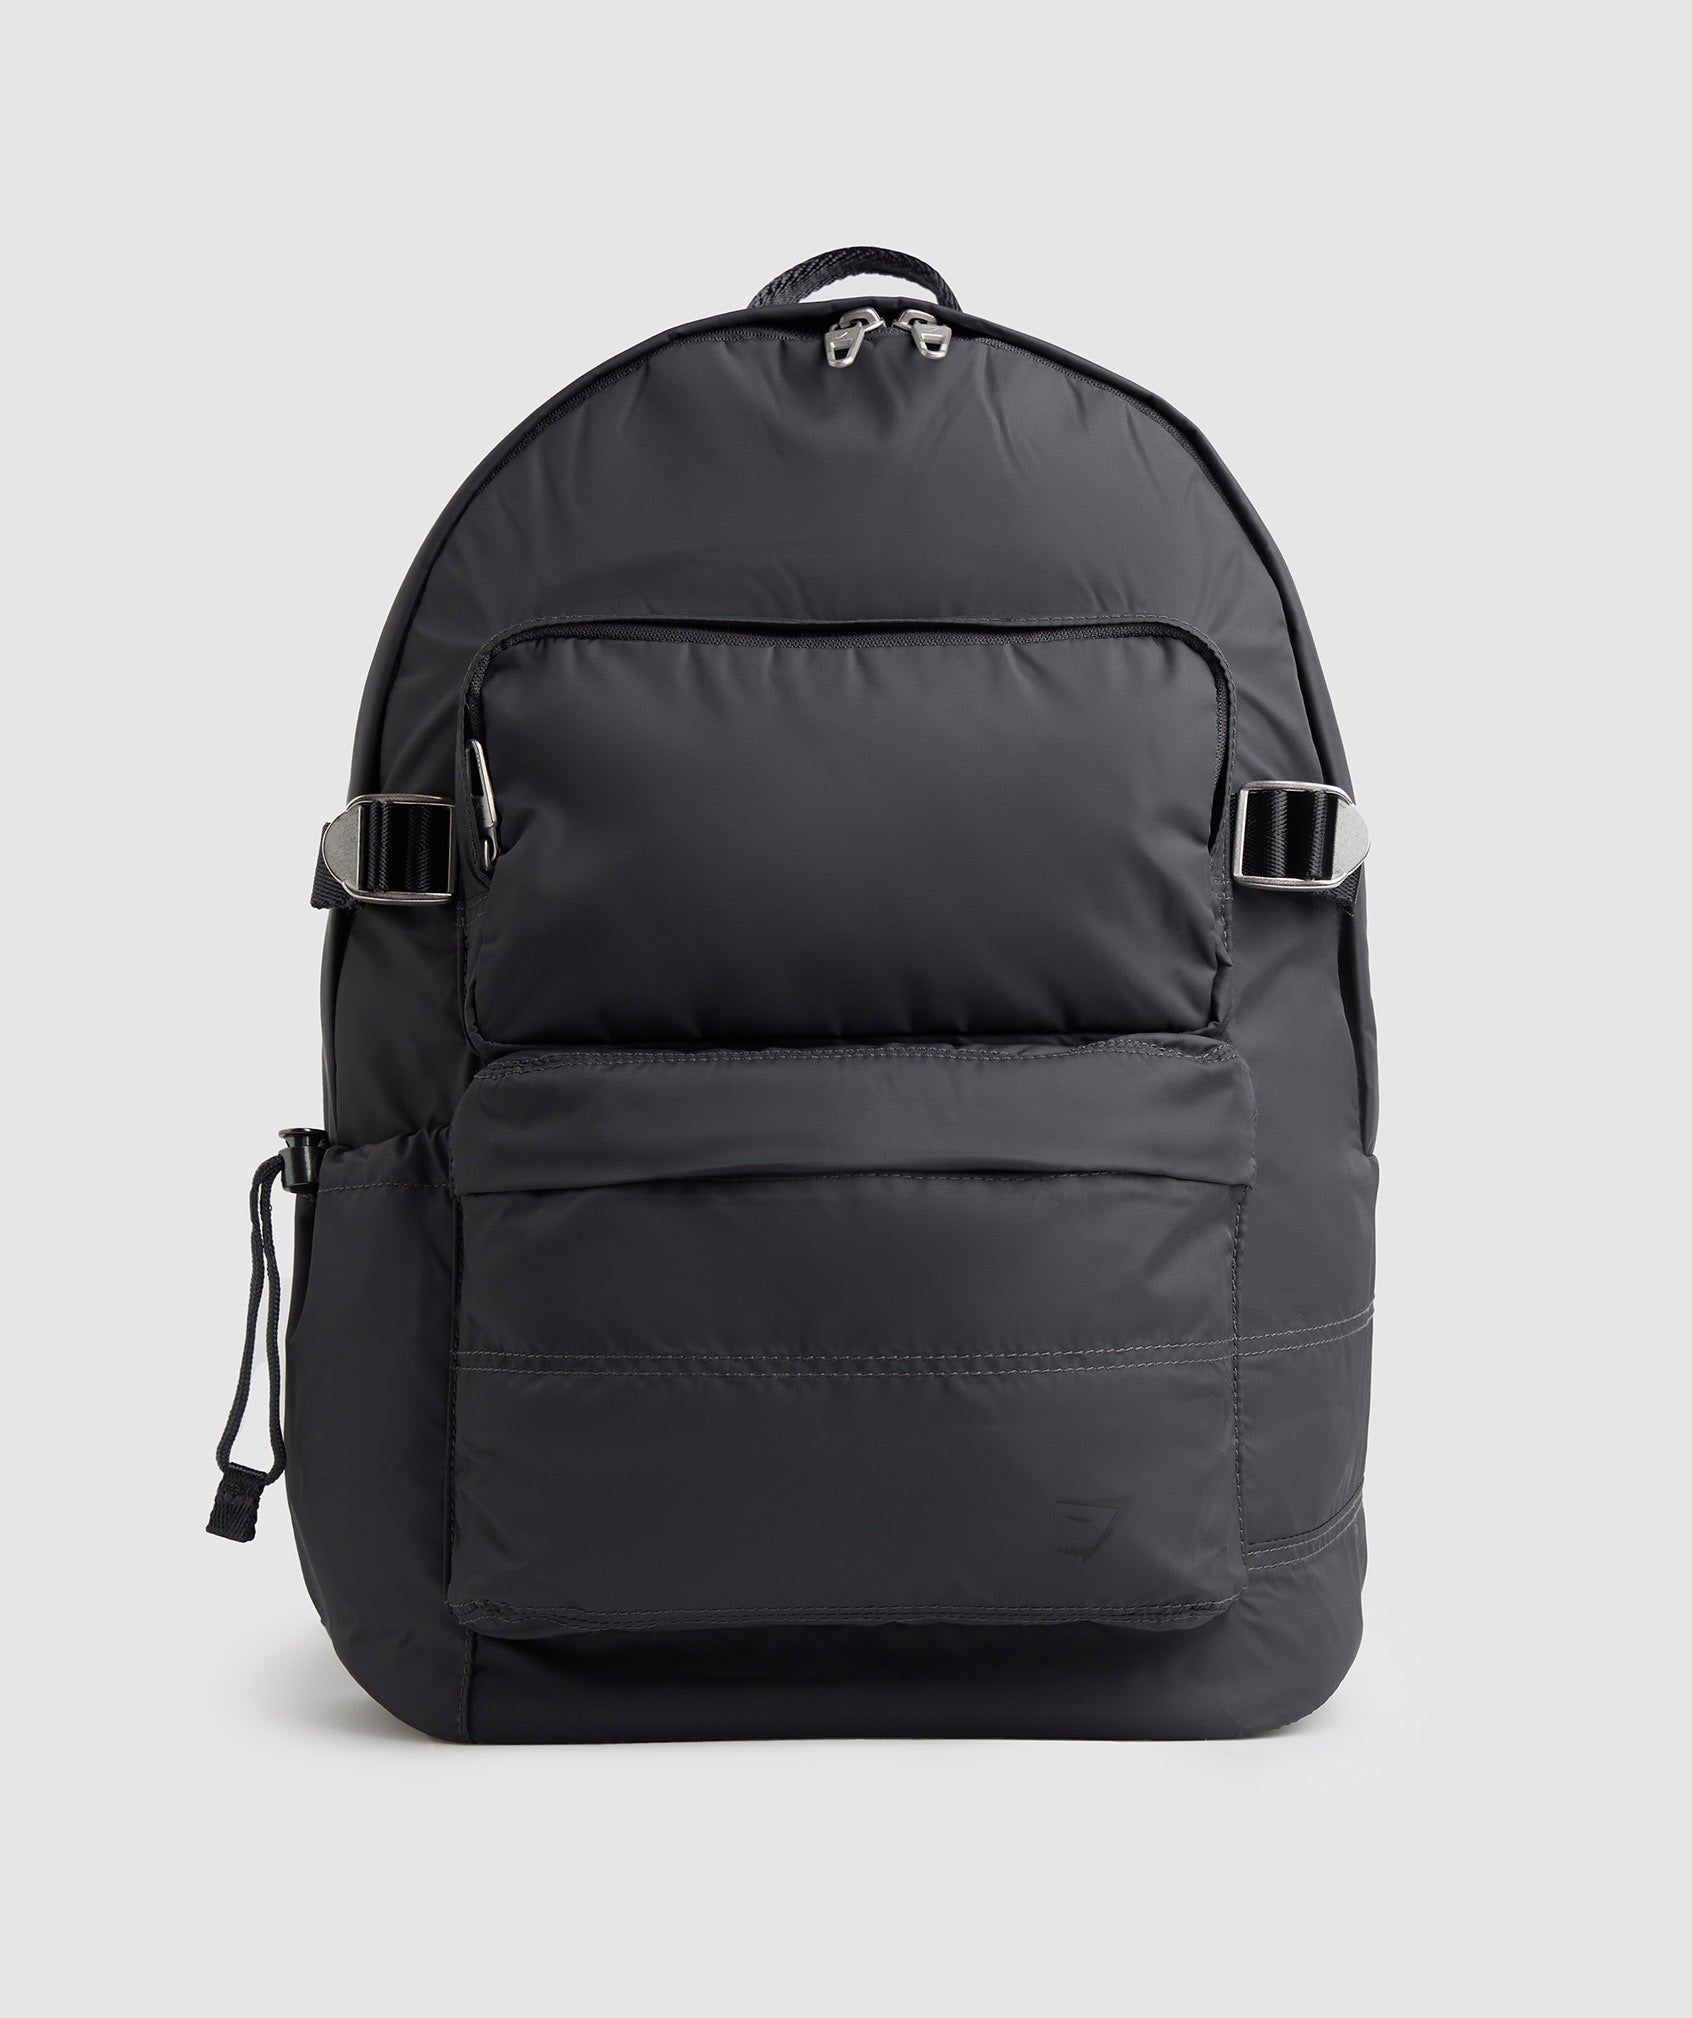 Premium Lifestyle Backpack in Onyx Grey - view 1